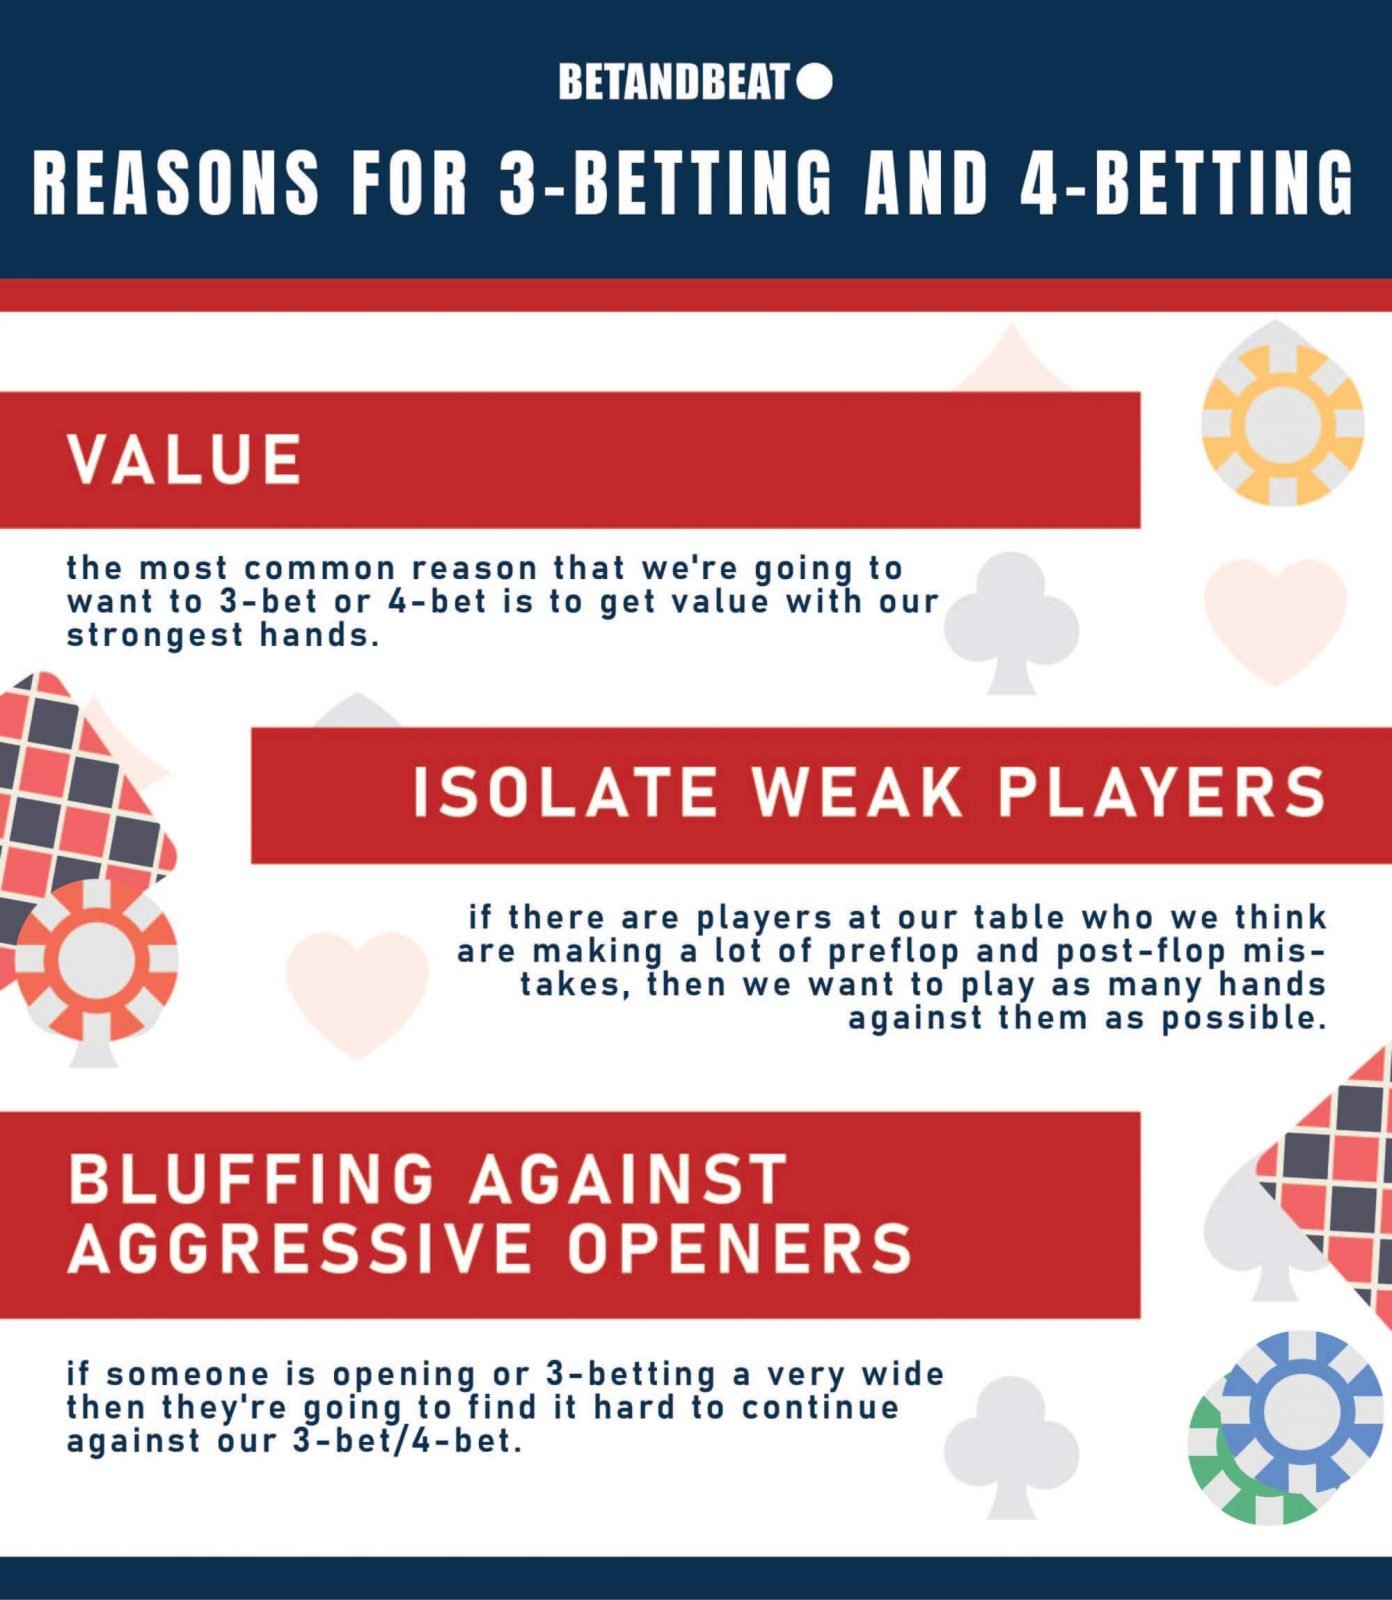 Why would a poker player use 3-bets and 4-bets?